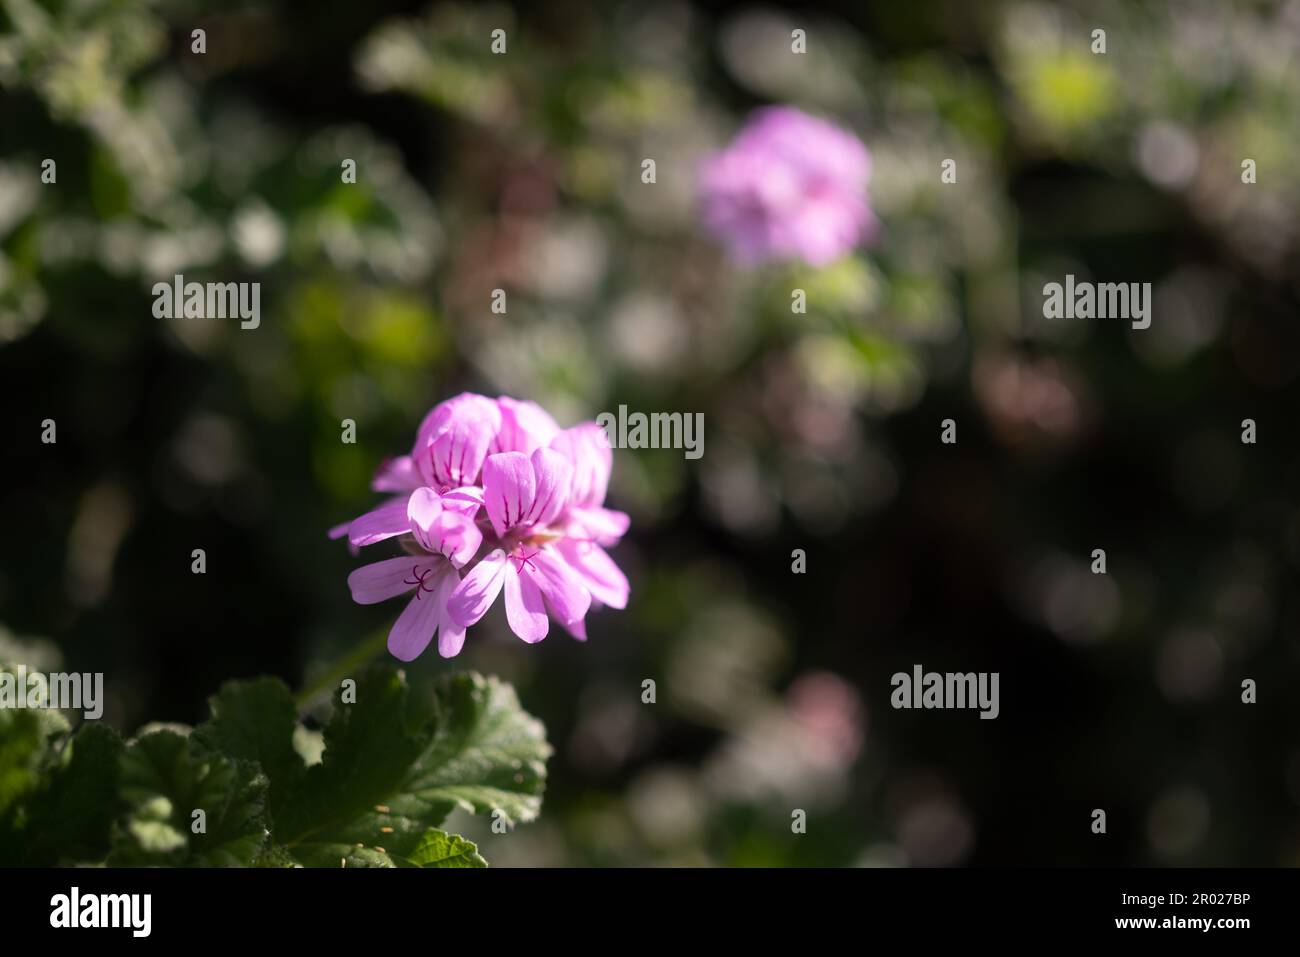 Mostly blurred sunny photo of pink flowers of rose scented geranium Stock Photo